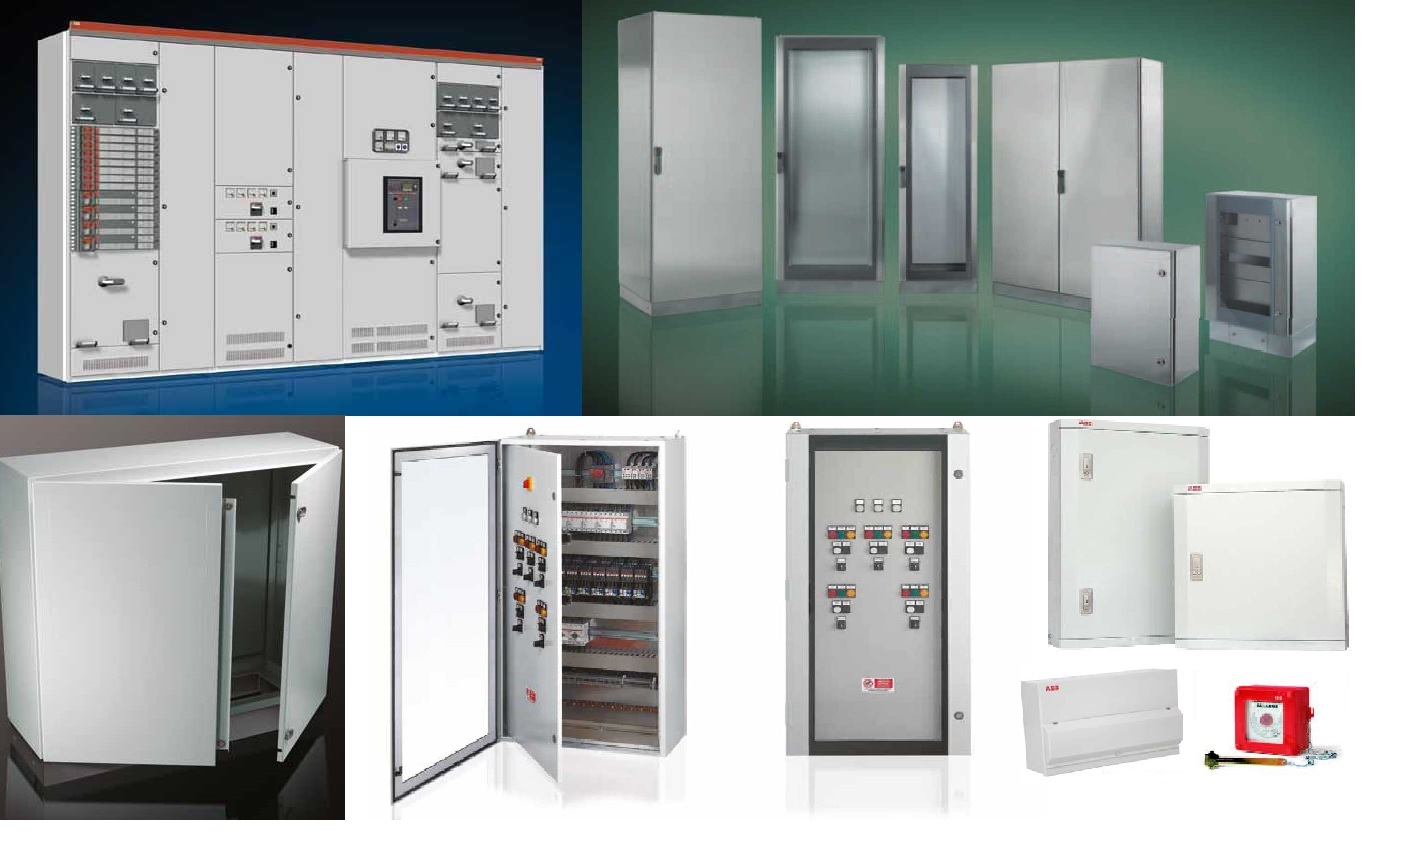 Other ABB enclosures